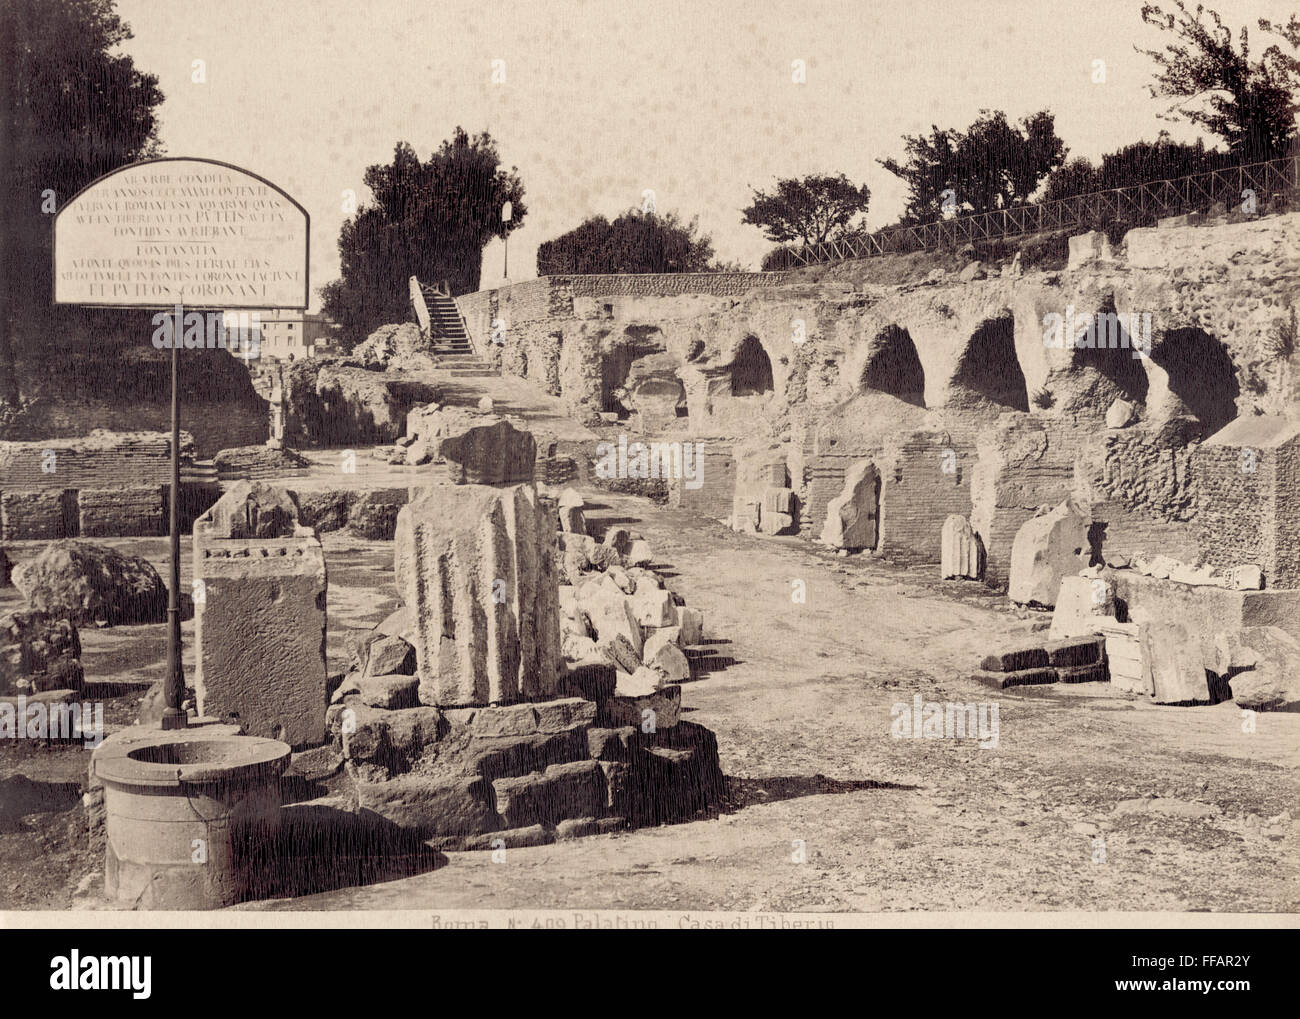 ROME: PALATINE HILL. /nThe ruins of the Palace of Tiberius at Palatine Hill, Rome. Photograph, 1890s. Stock Photo